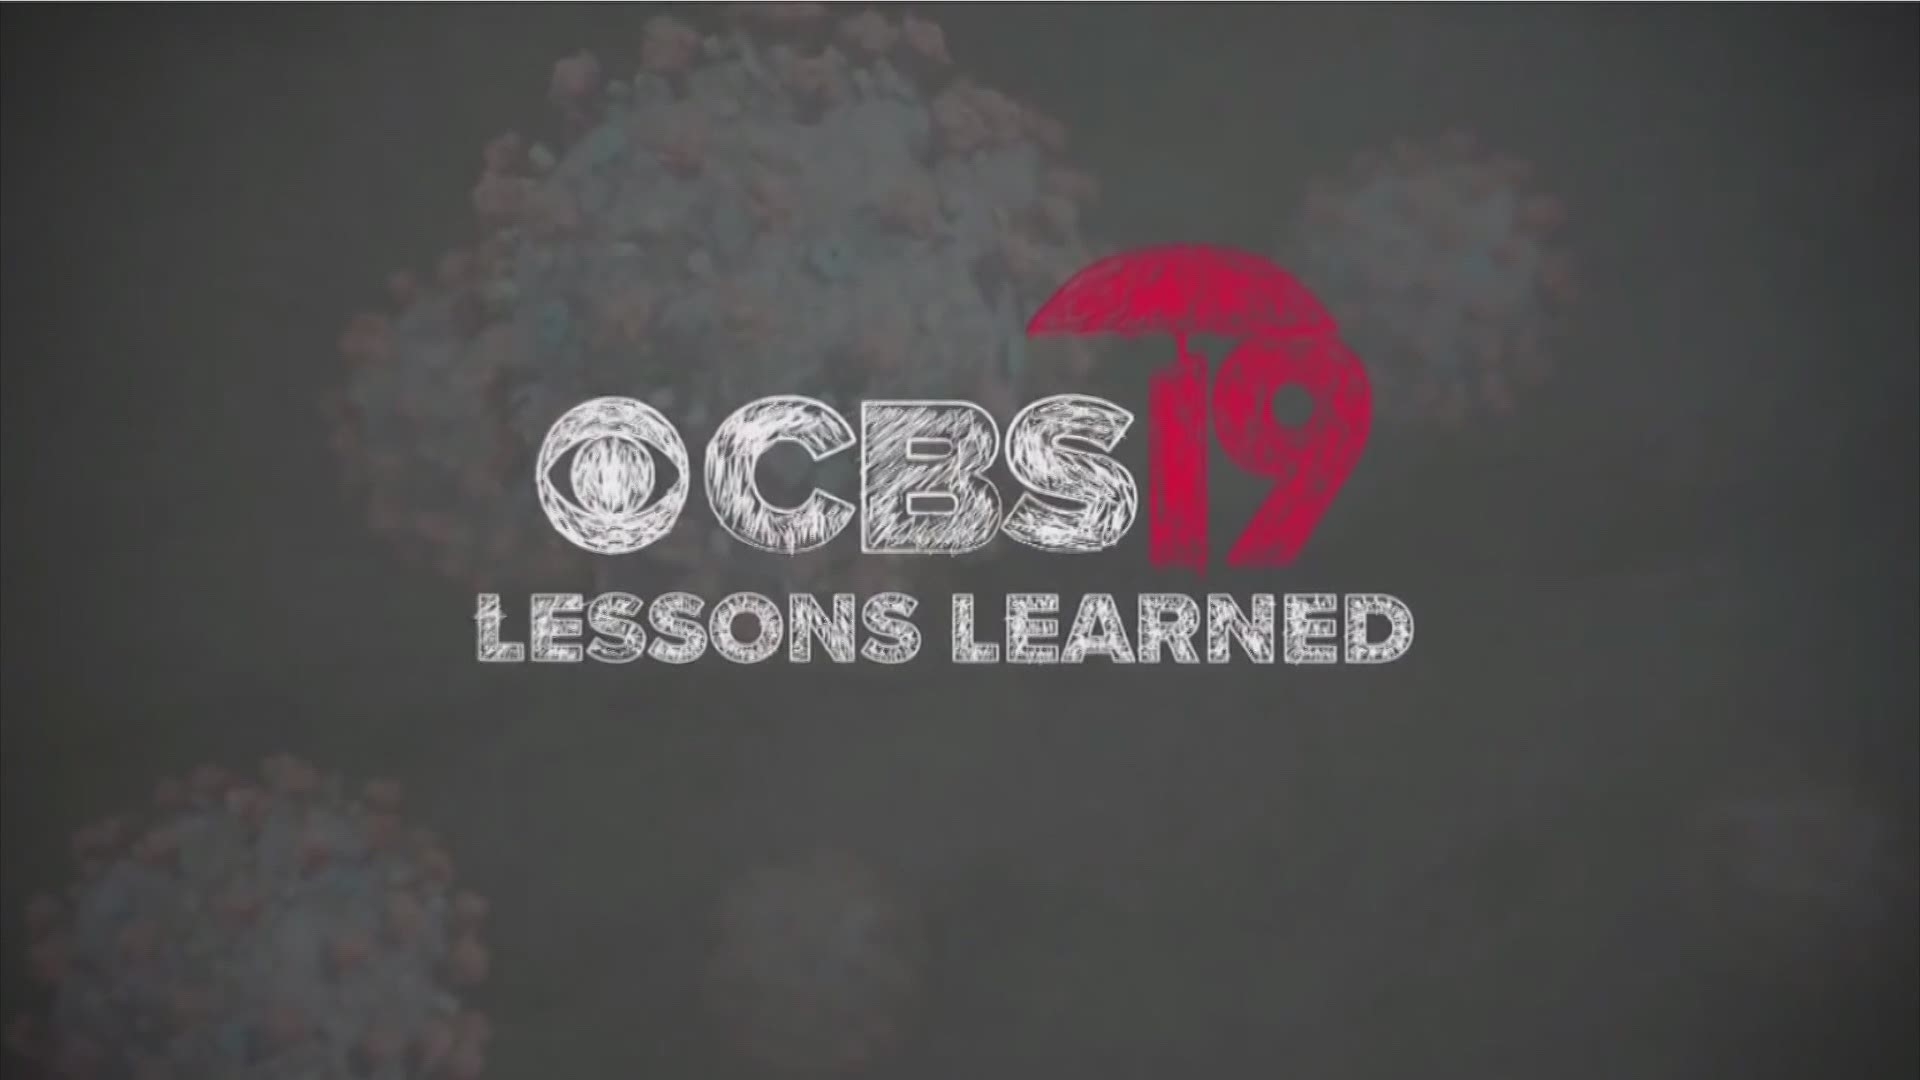 An interview with CBS19's Dana Hughey about her series of stories on public education and how the pandemic is affecting students